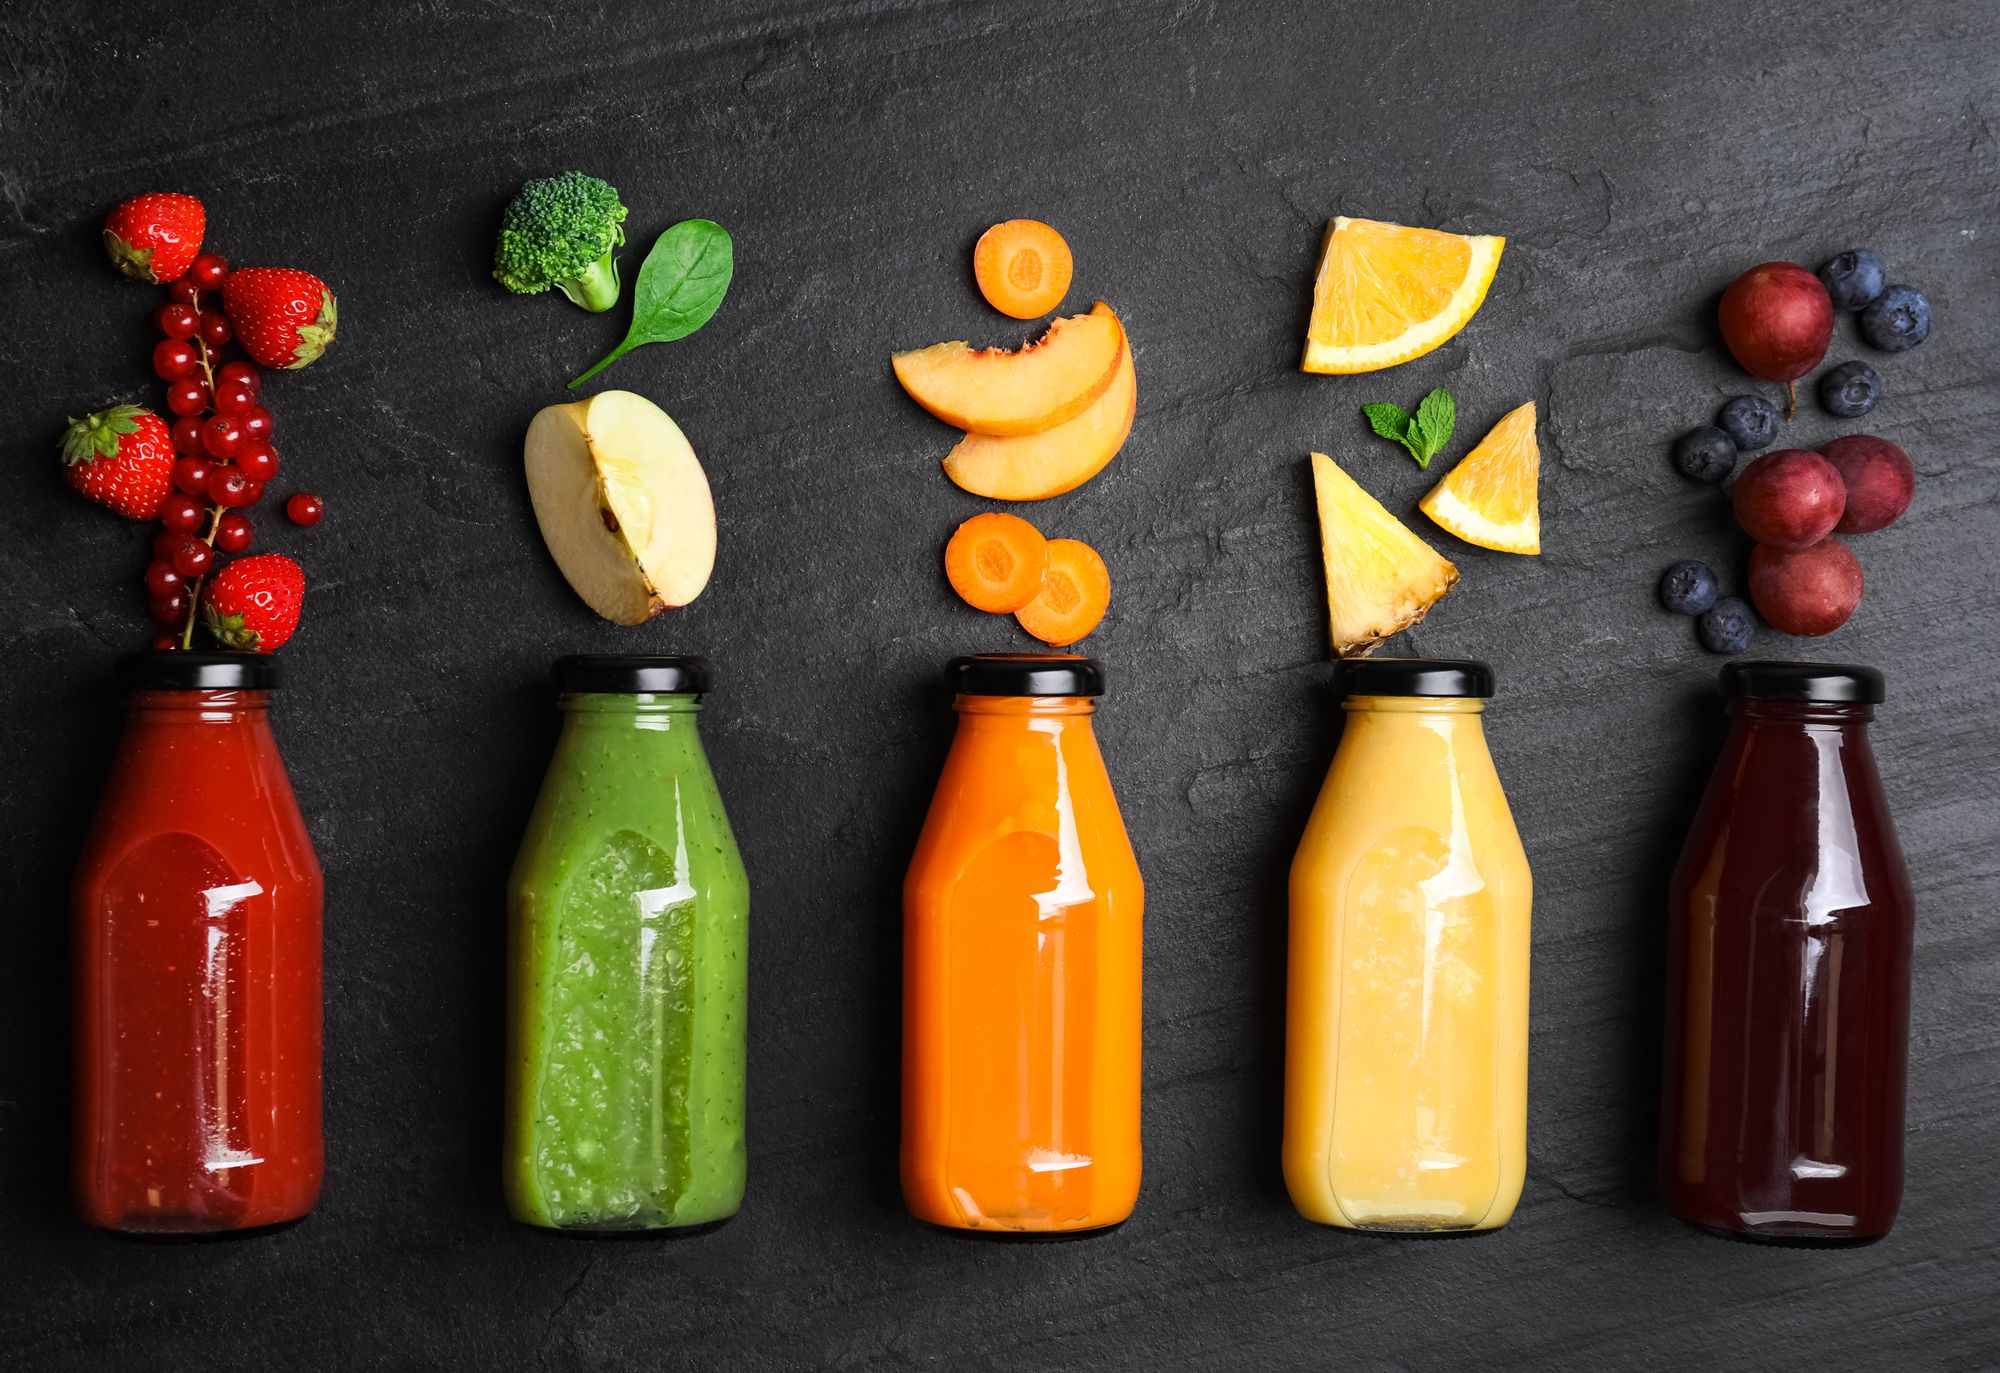 Fruit Juices By New Africa | www.shutterstock.com